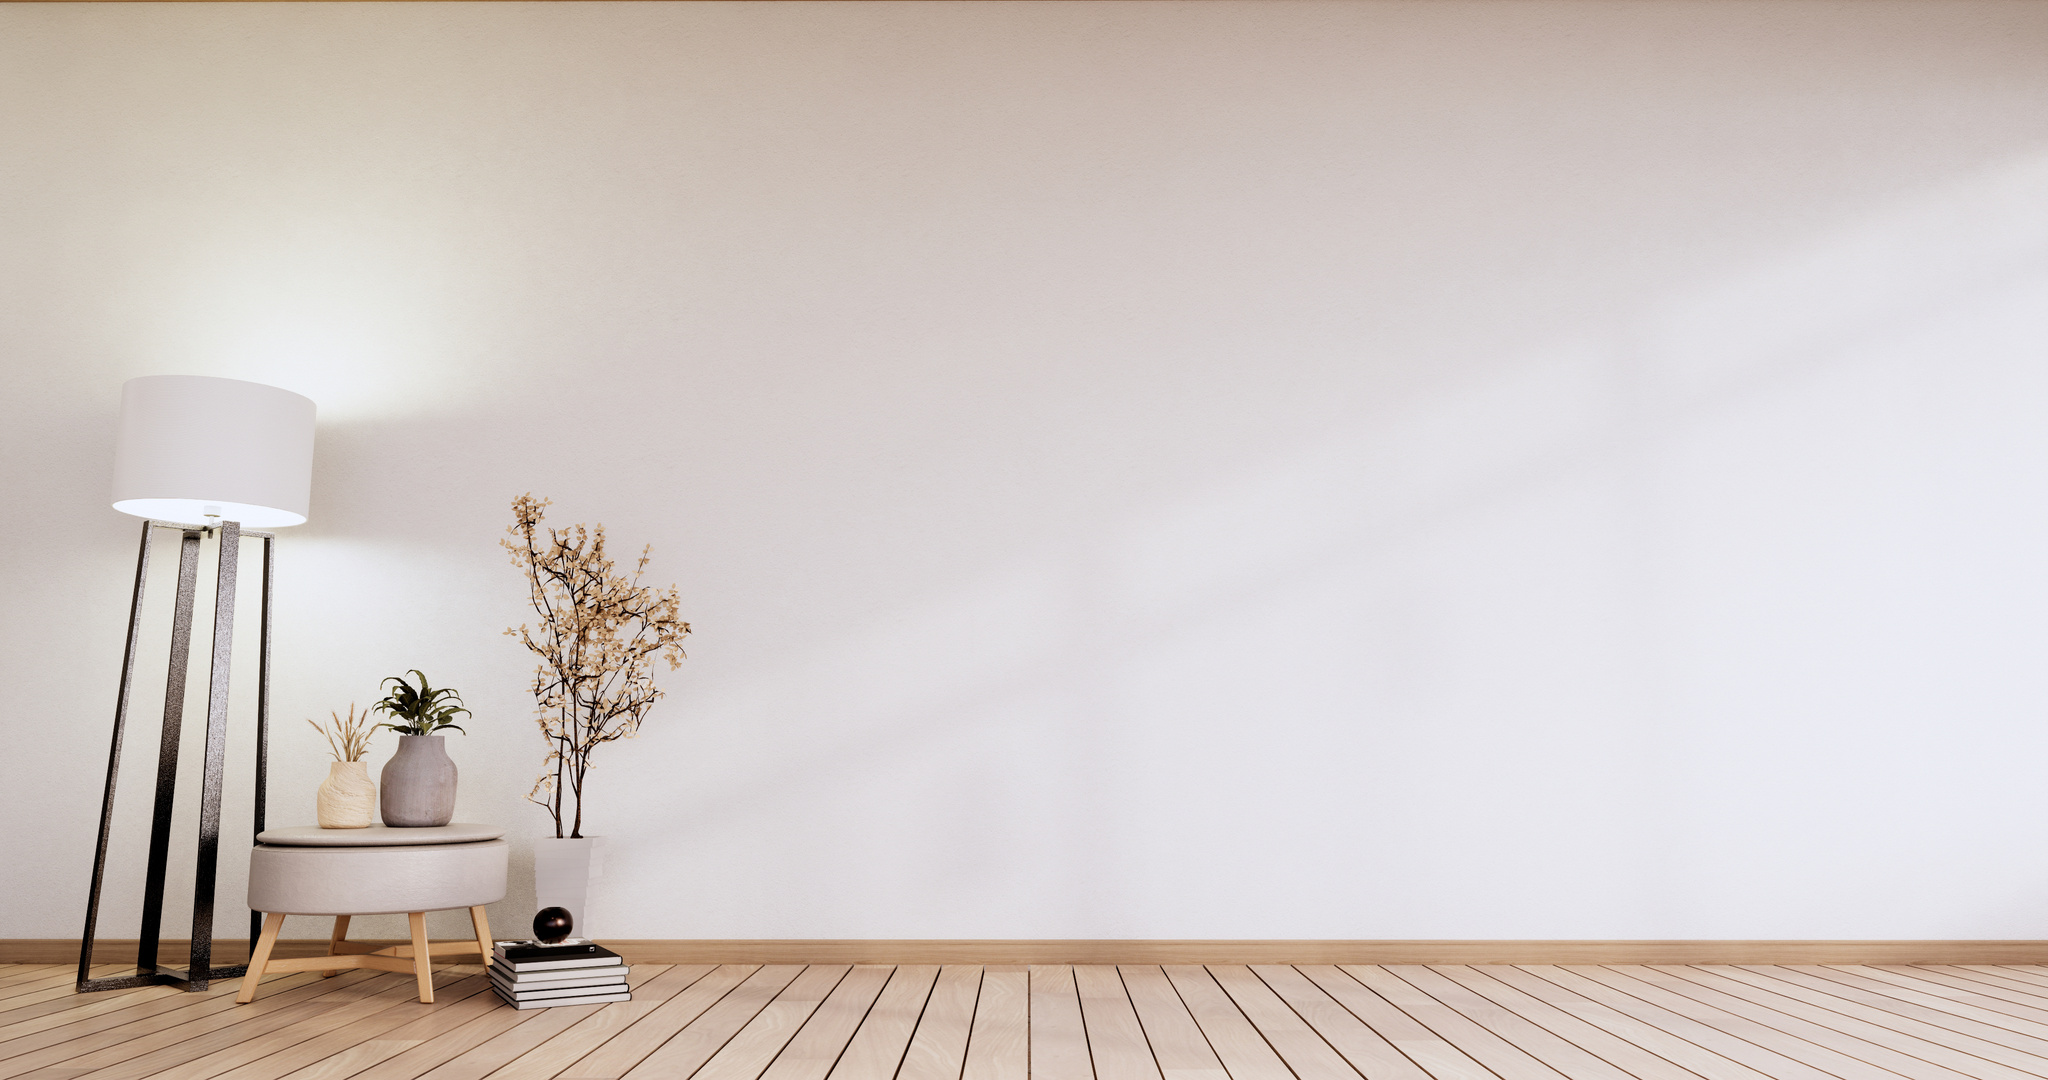 Empty Room - White Wall on Wood Floor Interior and Decorations P